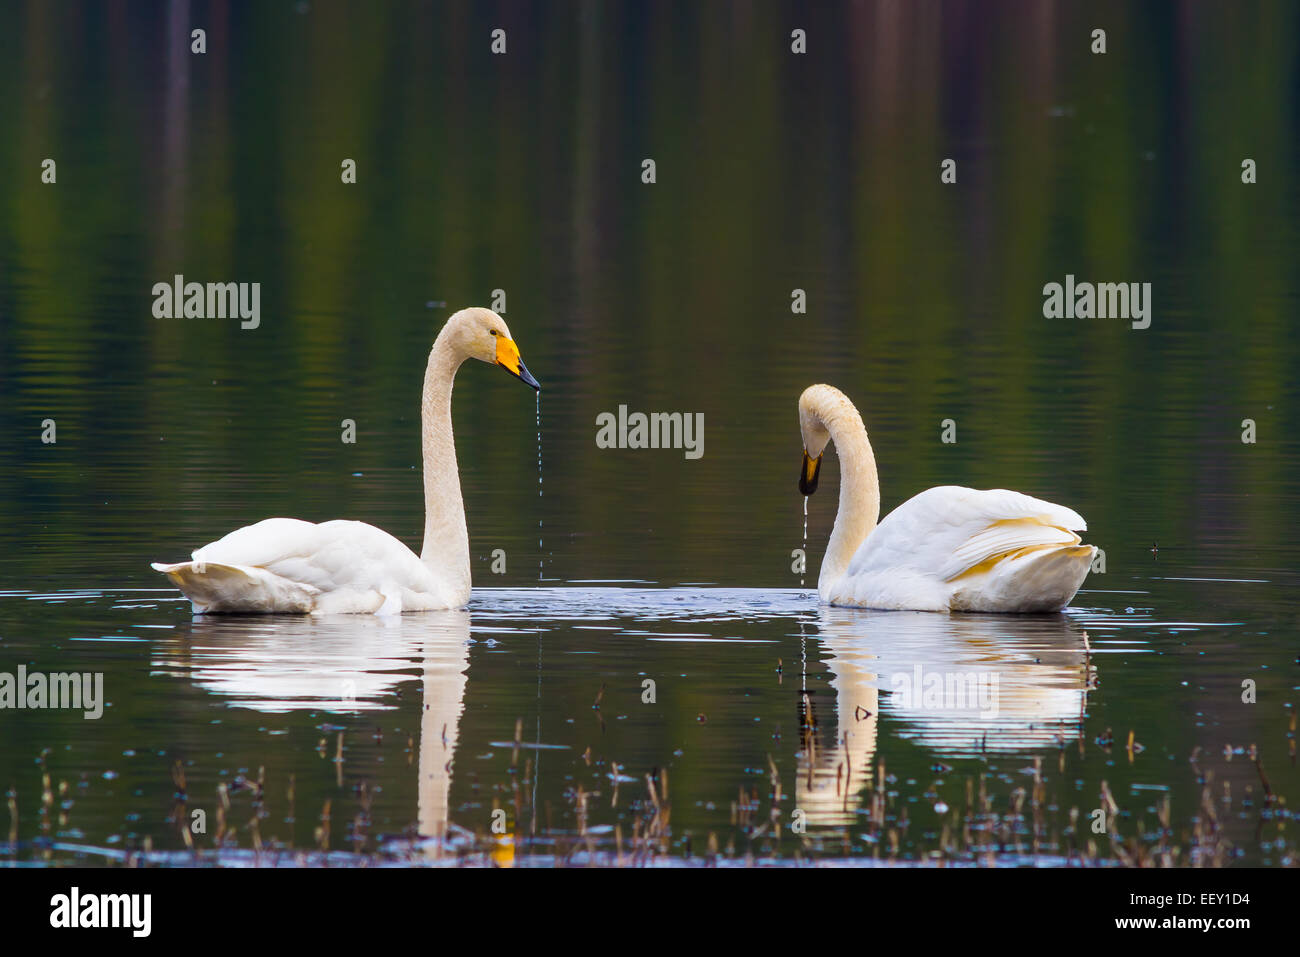 Couple of swans in water Stock Photo